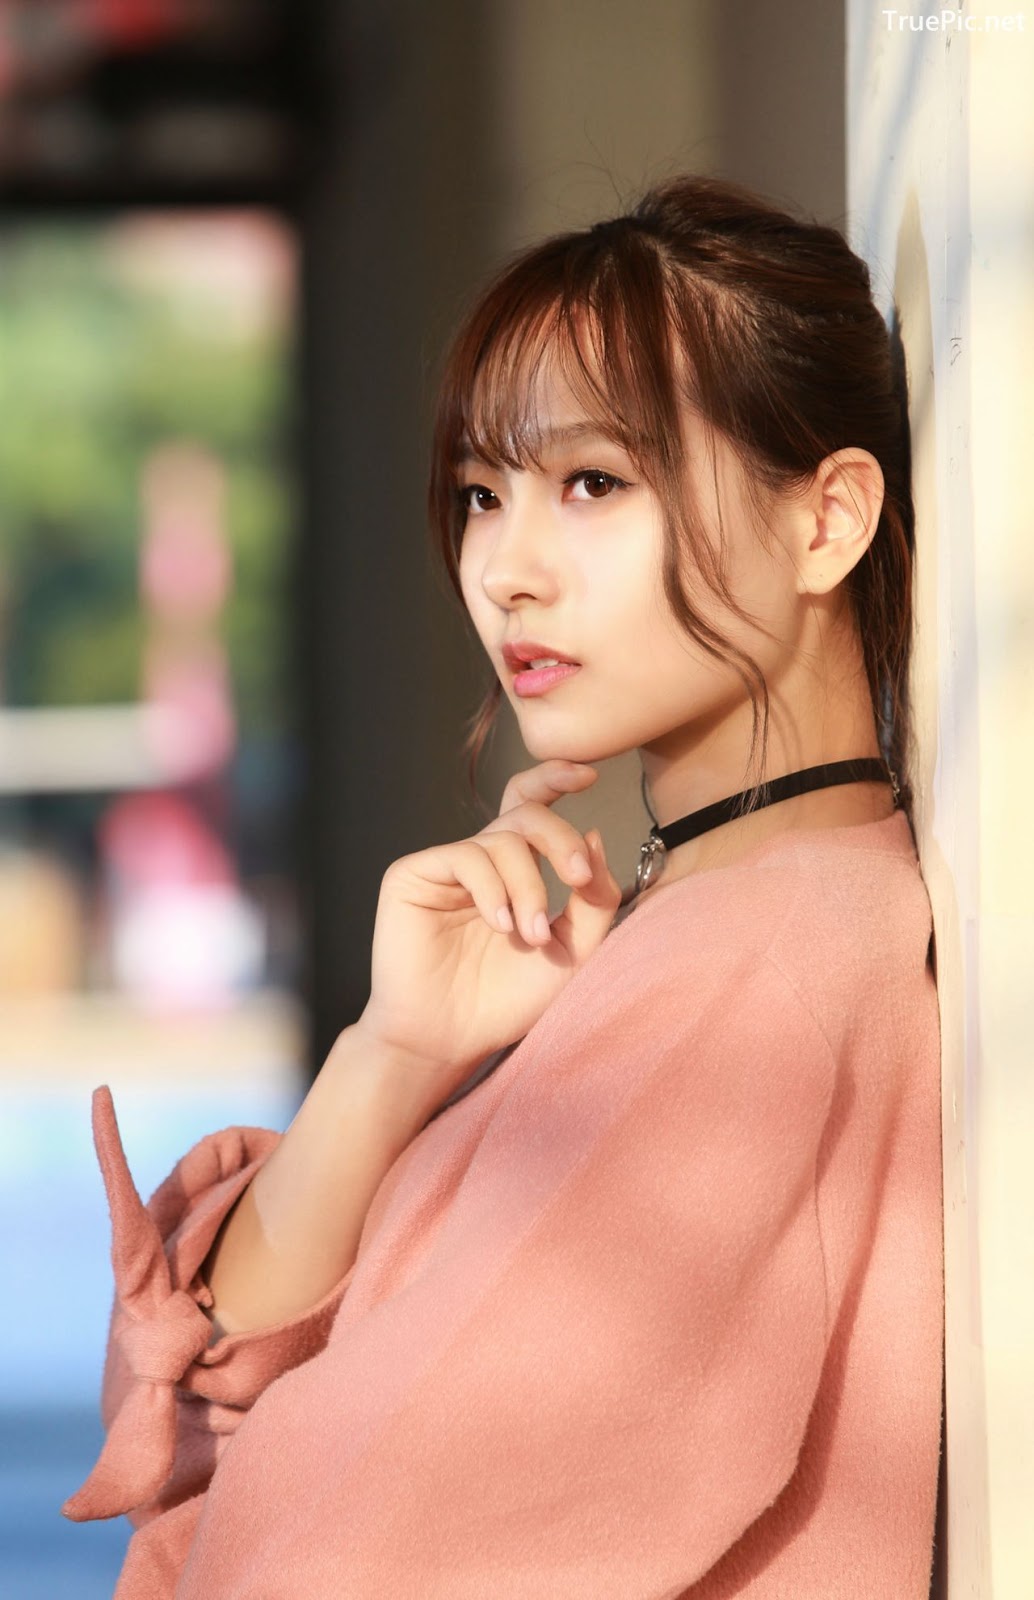 Image-Taiwanese-Model-郭思敏-Pure-And-Gorgeous-Girl-In-Pink-Sweater-Dress-TruePic.net- Picture-34